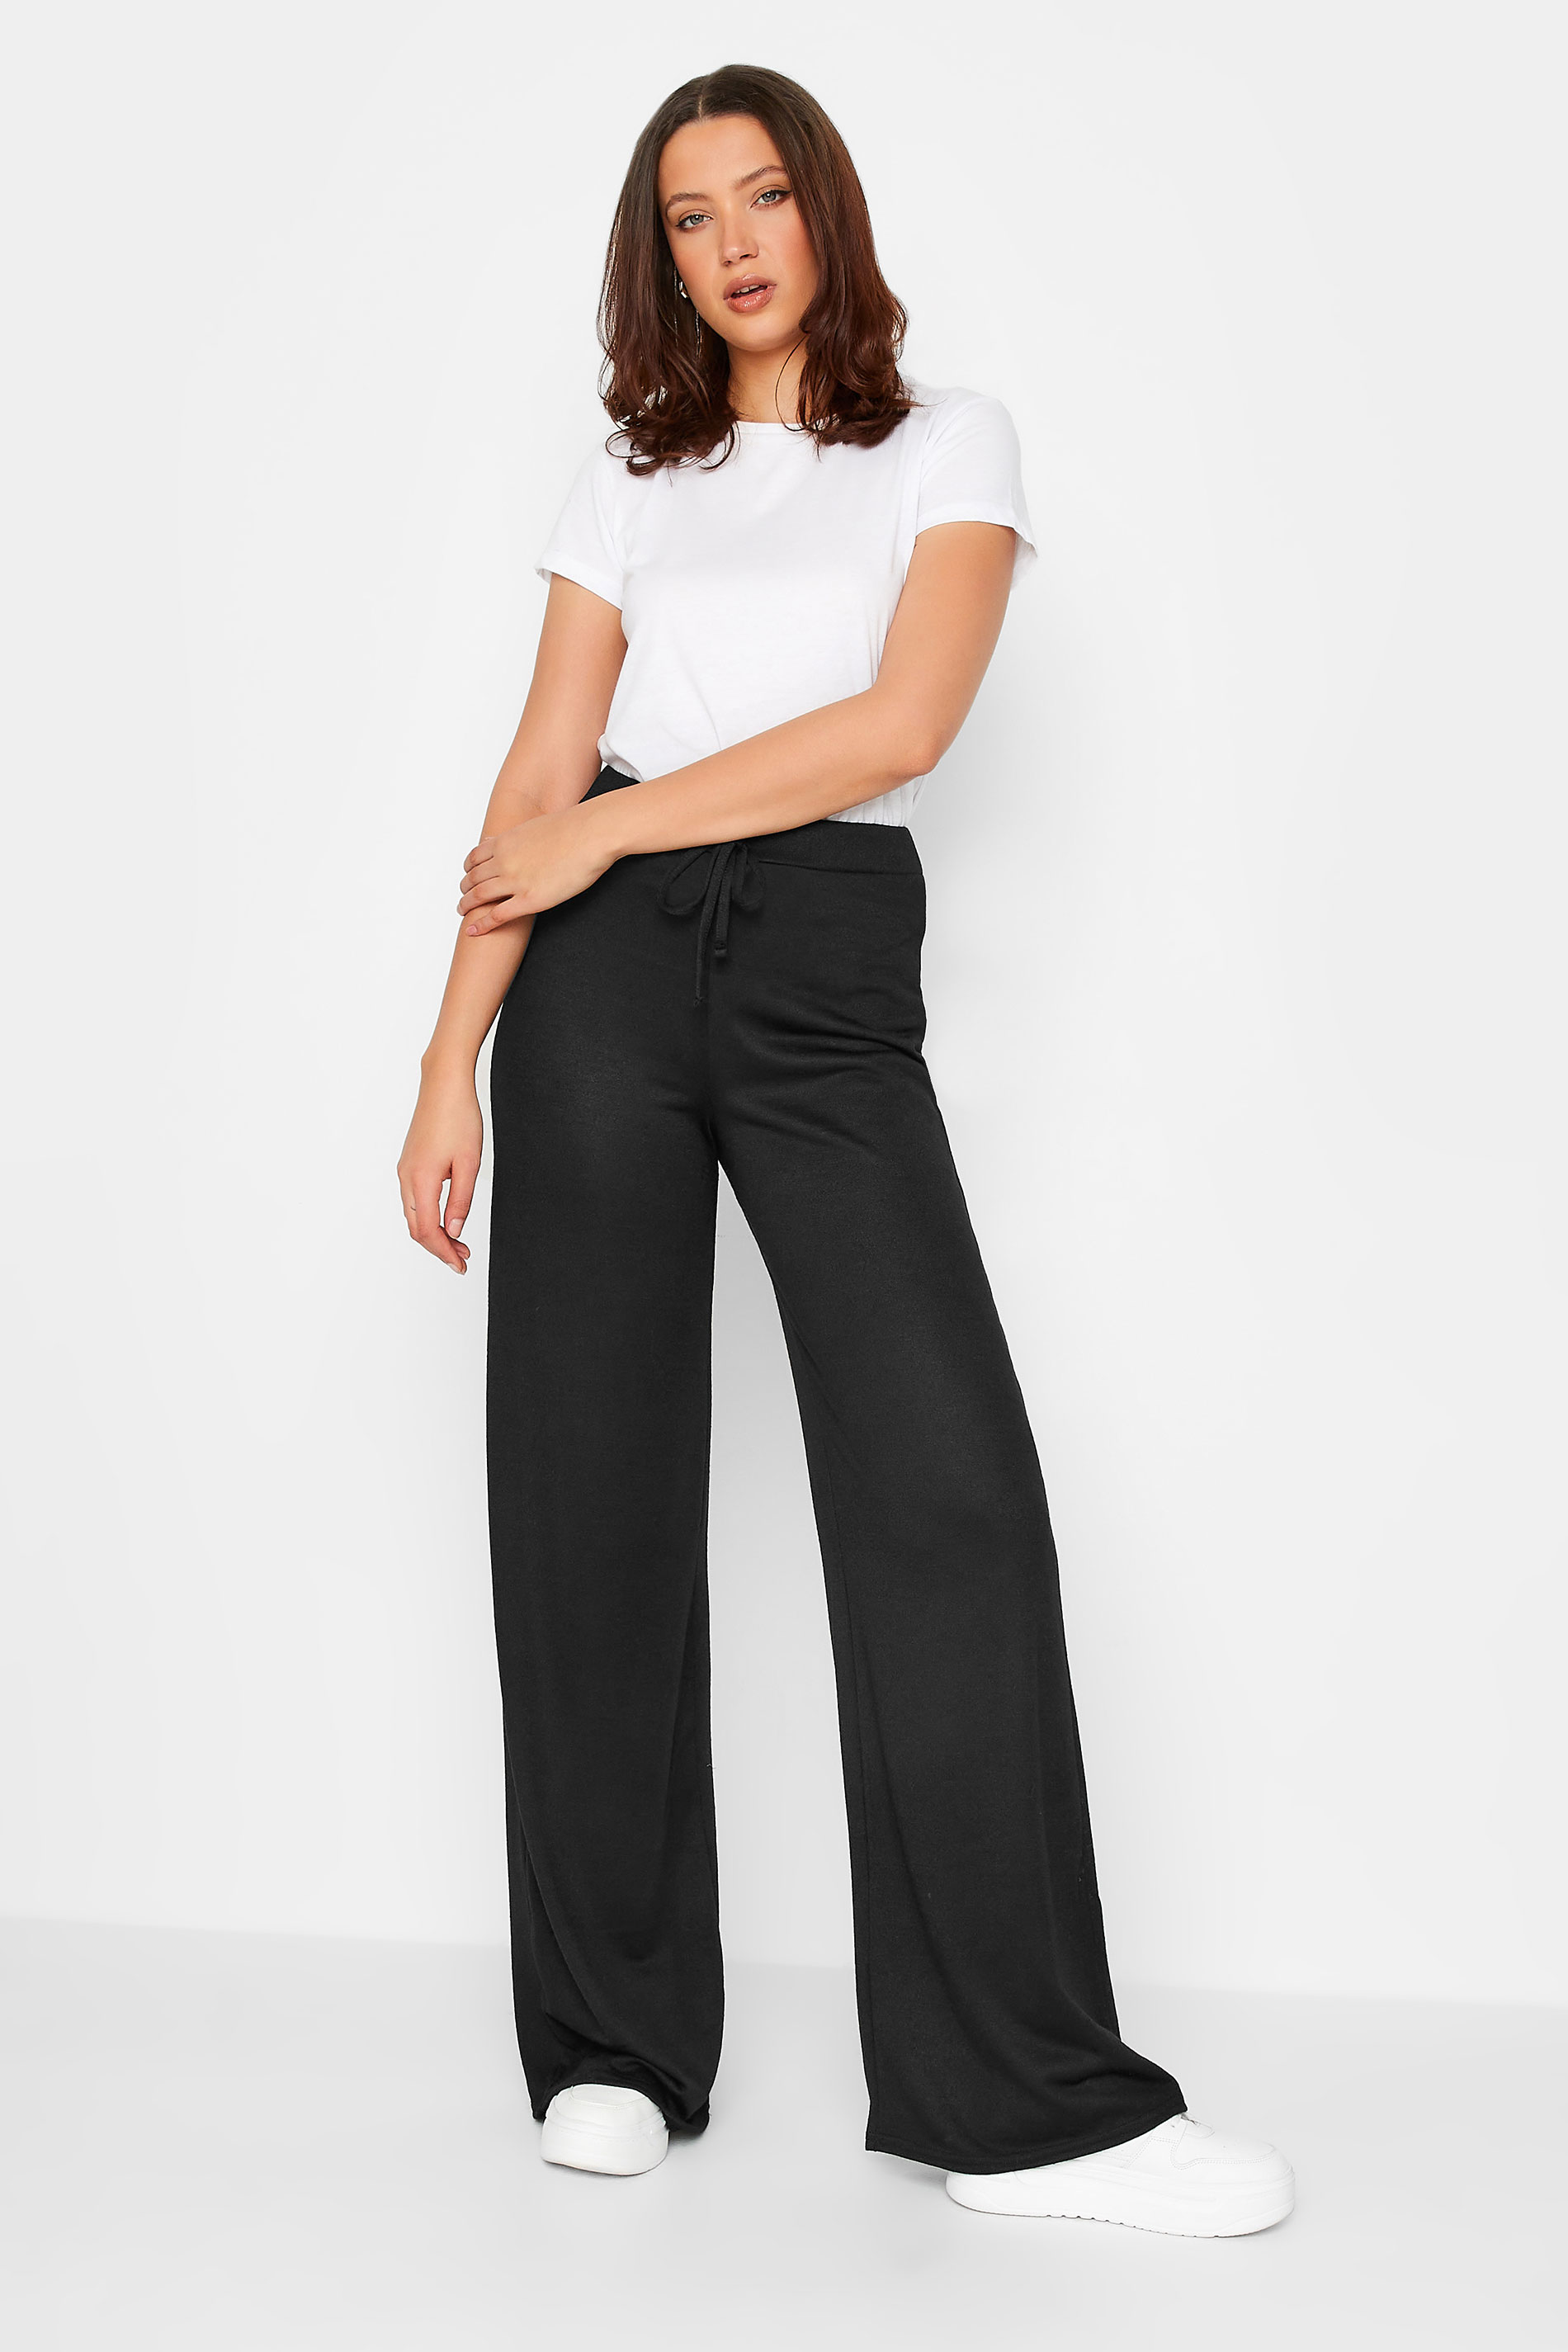 LTS Tall Black Knitted Trousers | Long Tall Sally